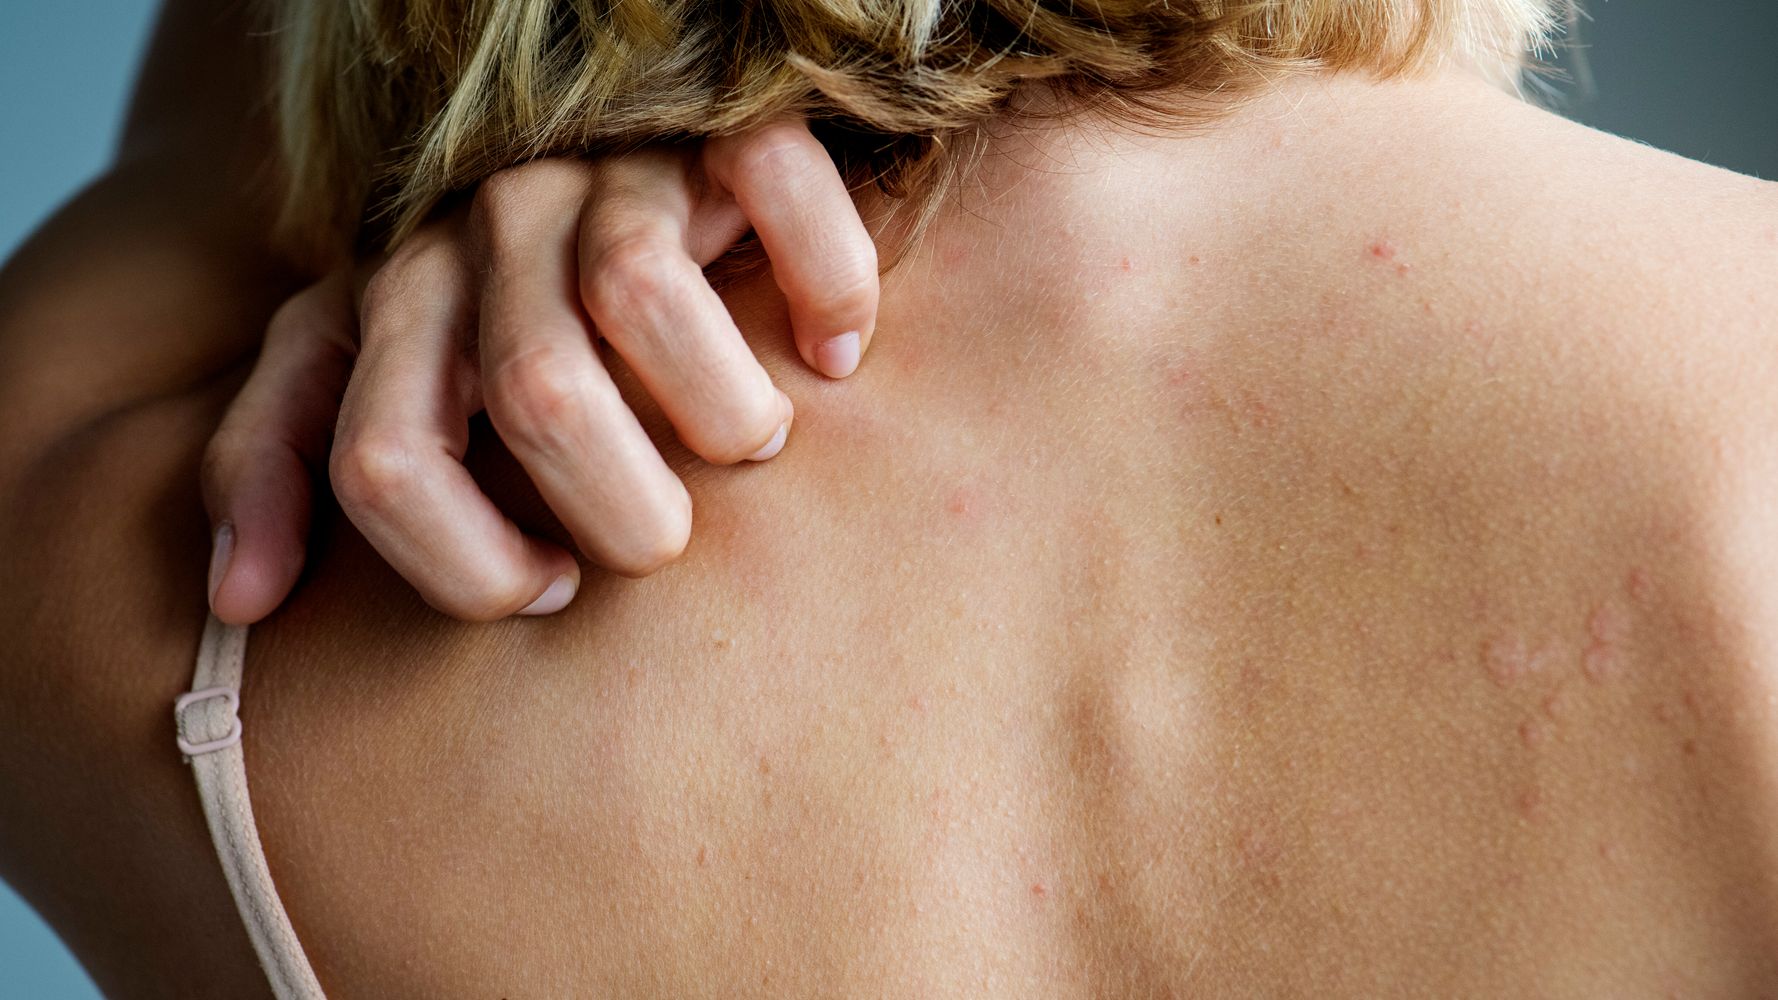 What Is Hidradenitis Suppurativa? Don't Ignore Those Lumps | HuffPost  Latest News